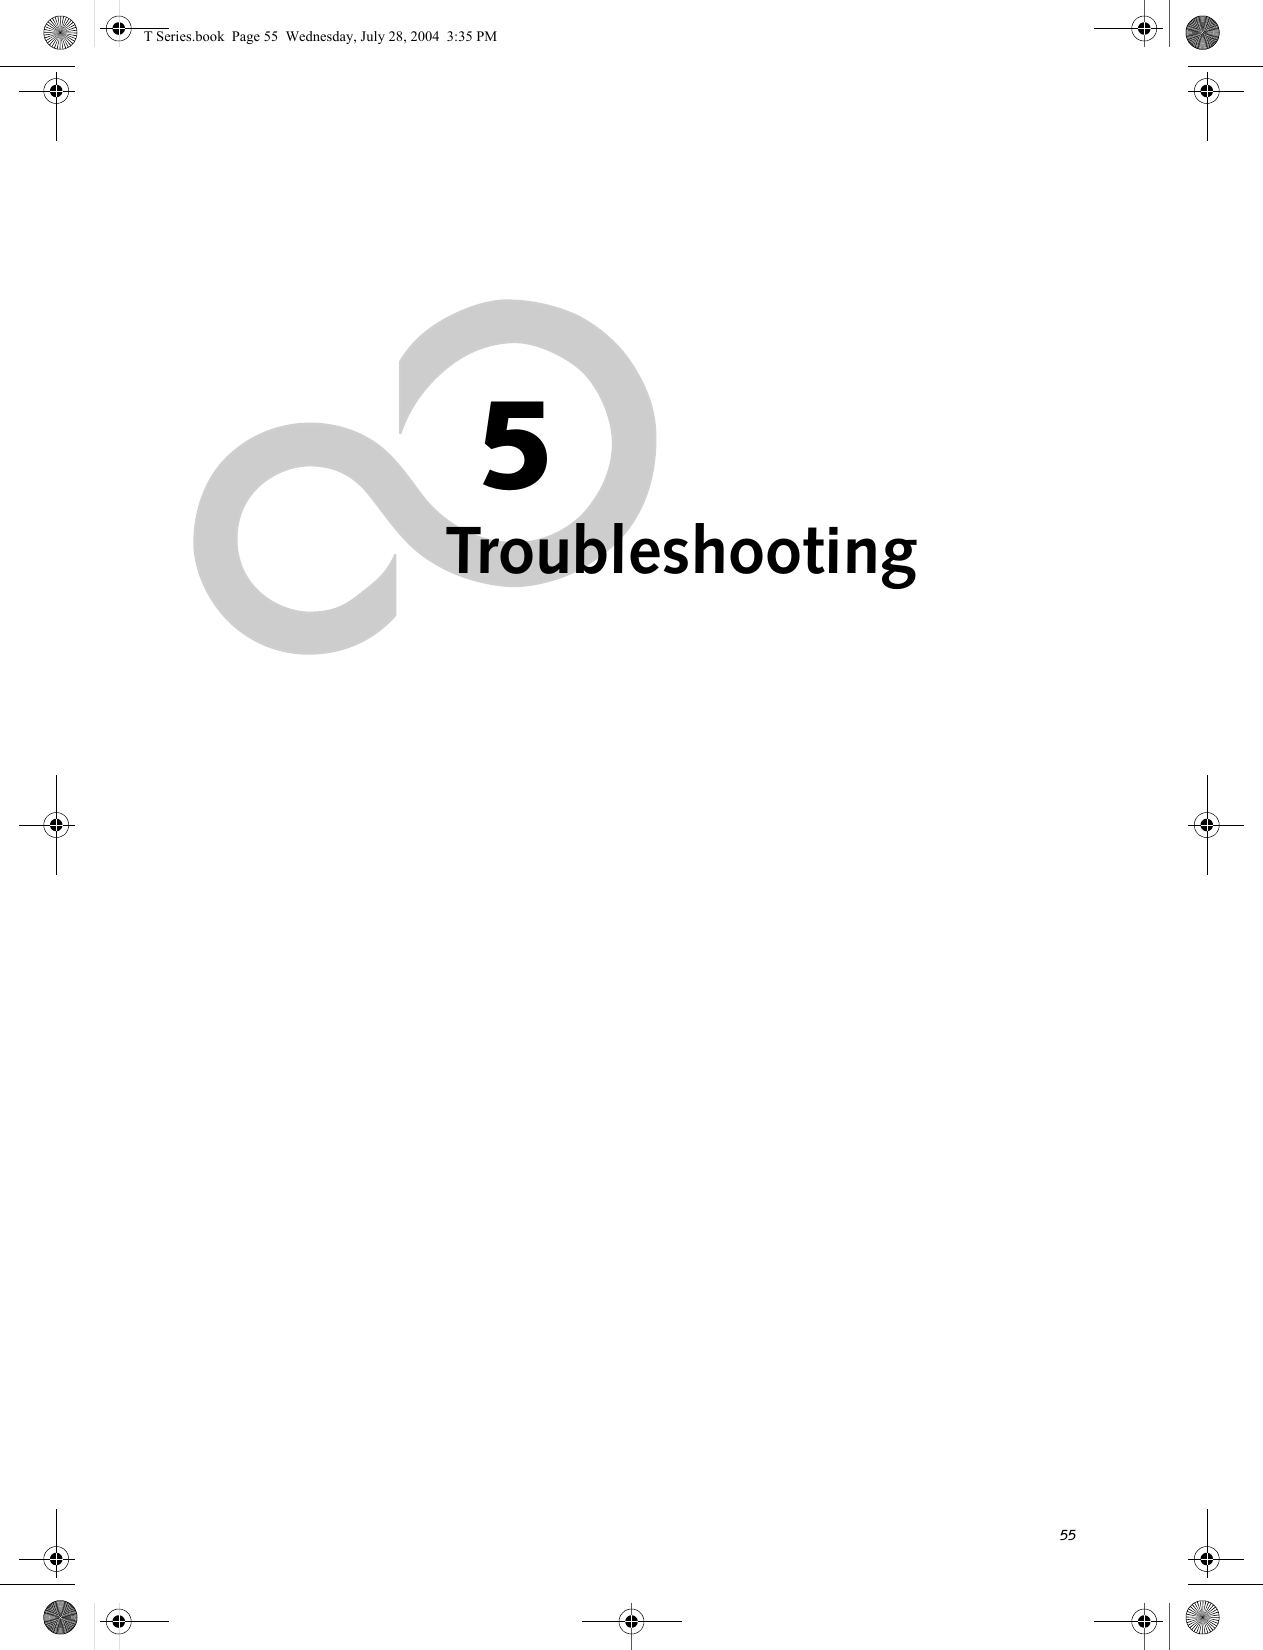 555TroubleshootingT Series.book  Page 55  Wednesday, July 28, 2004  3:35 PM